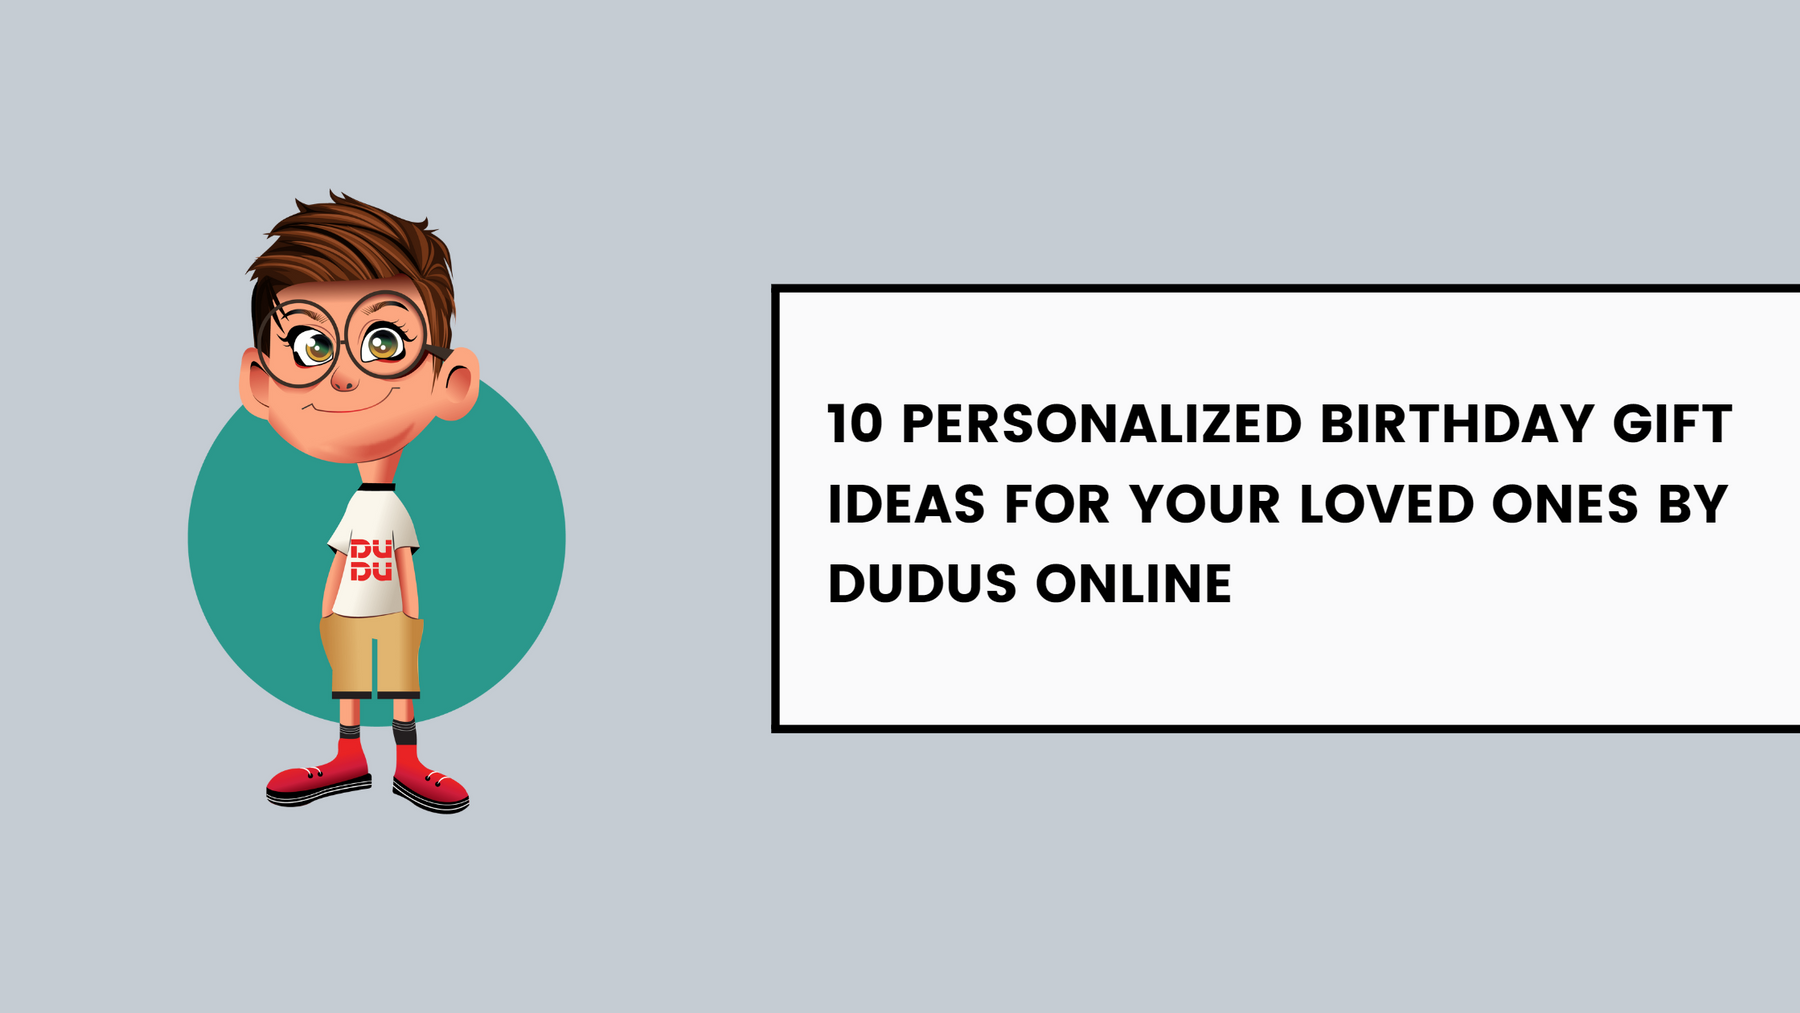 10 Personalized Birthday Gift Ideas For Your Loved Ones By Dudus Online